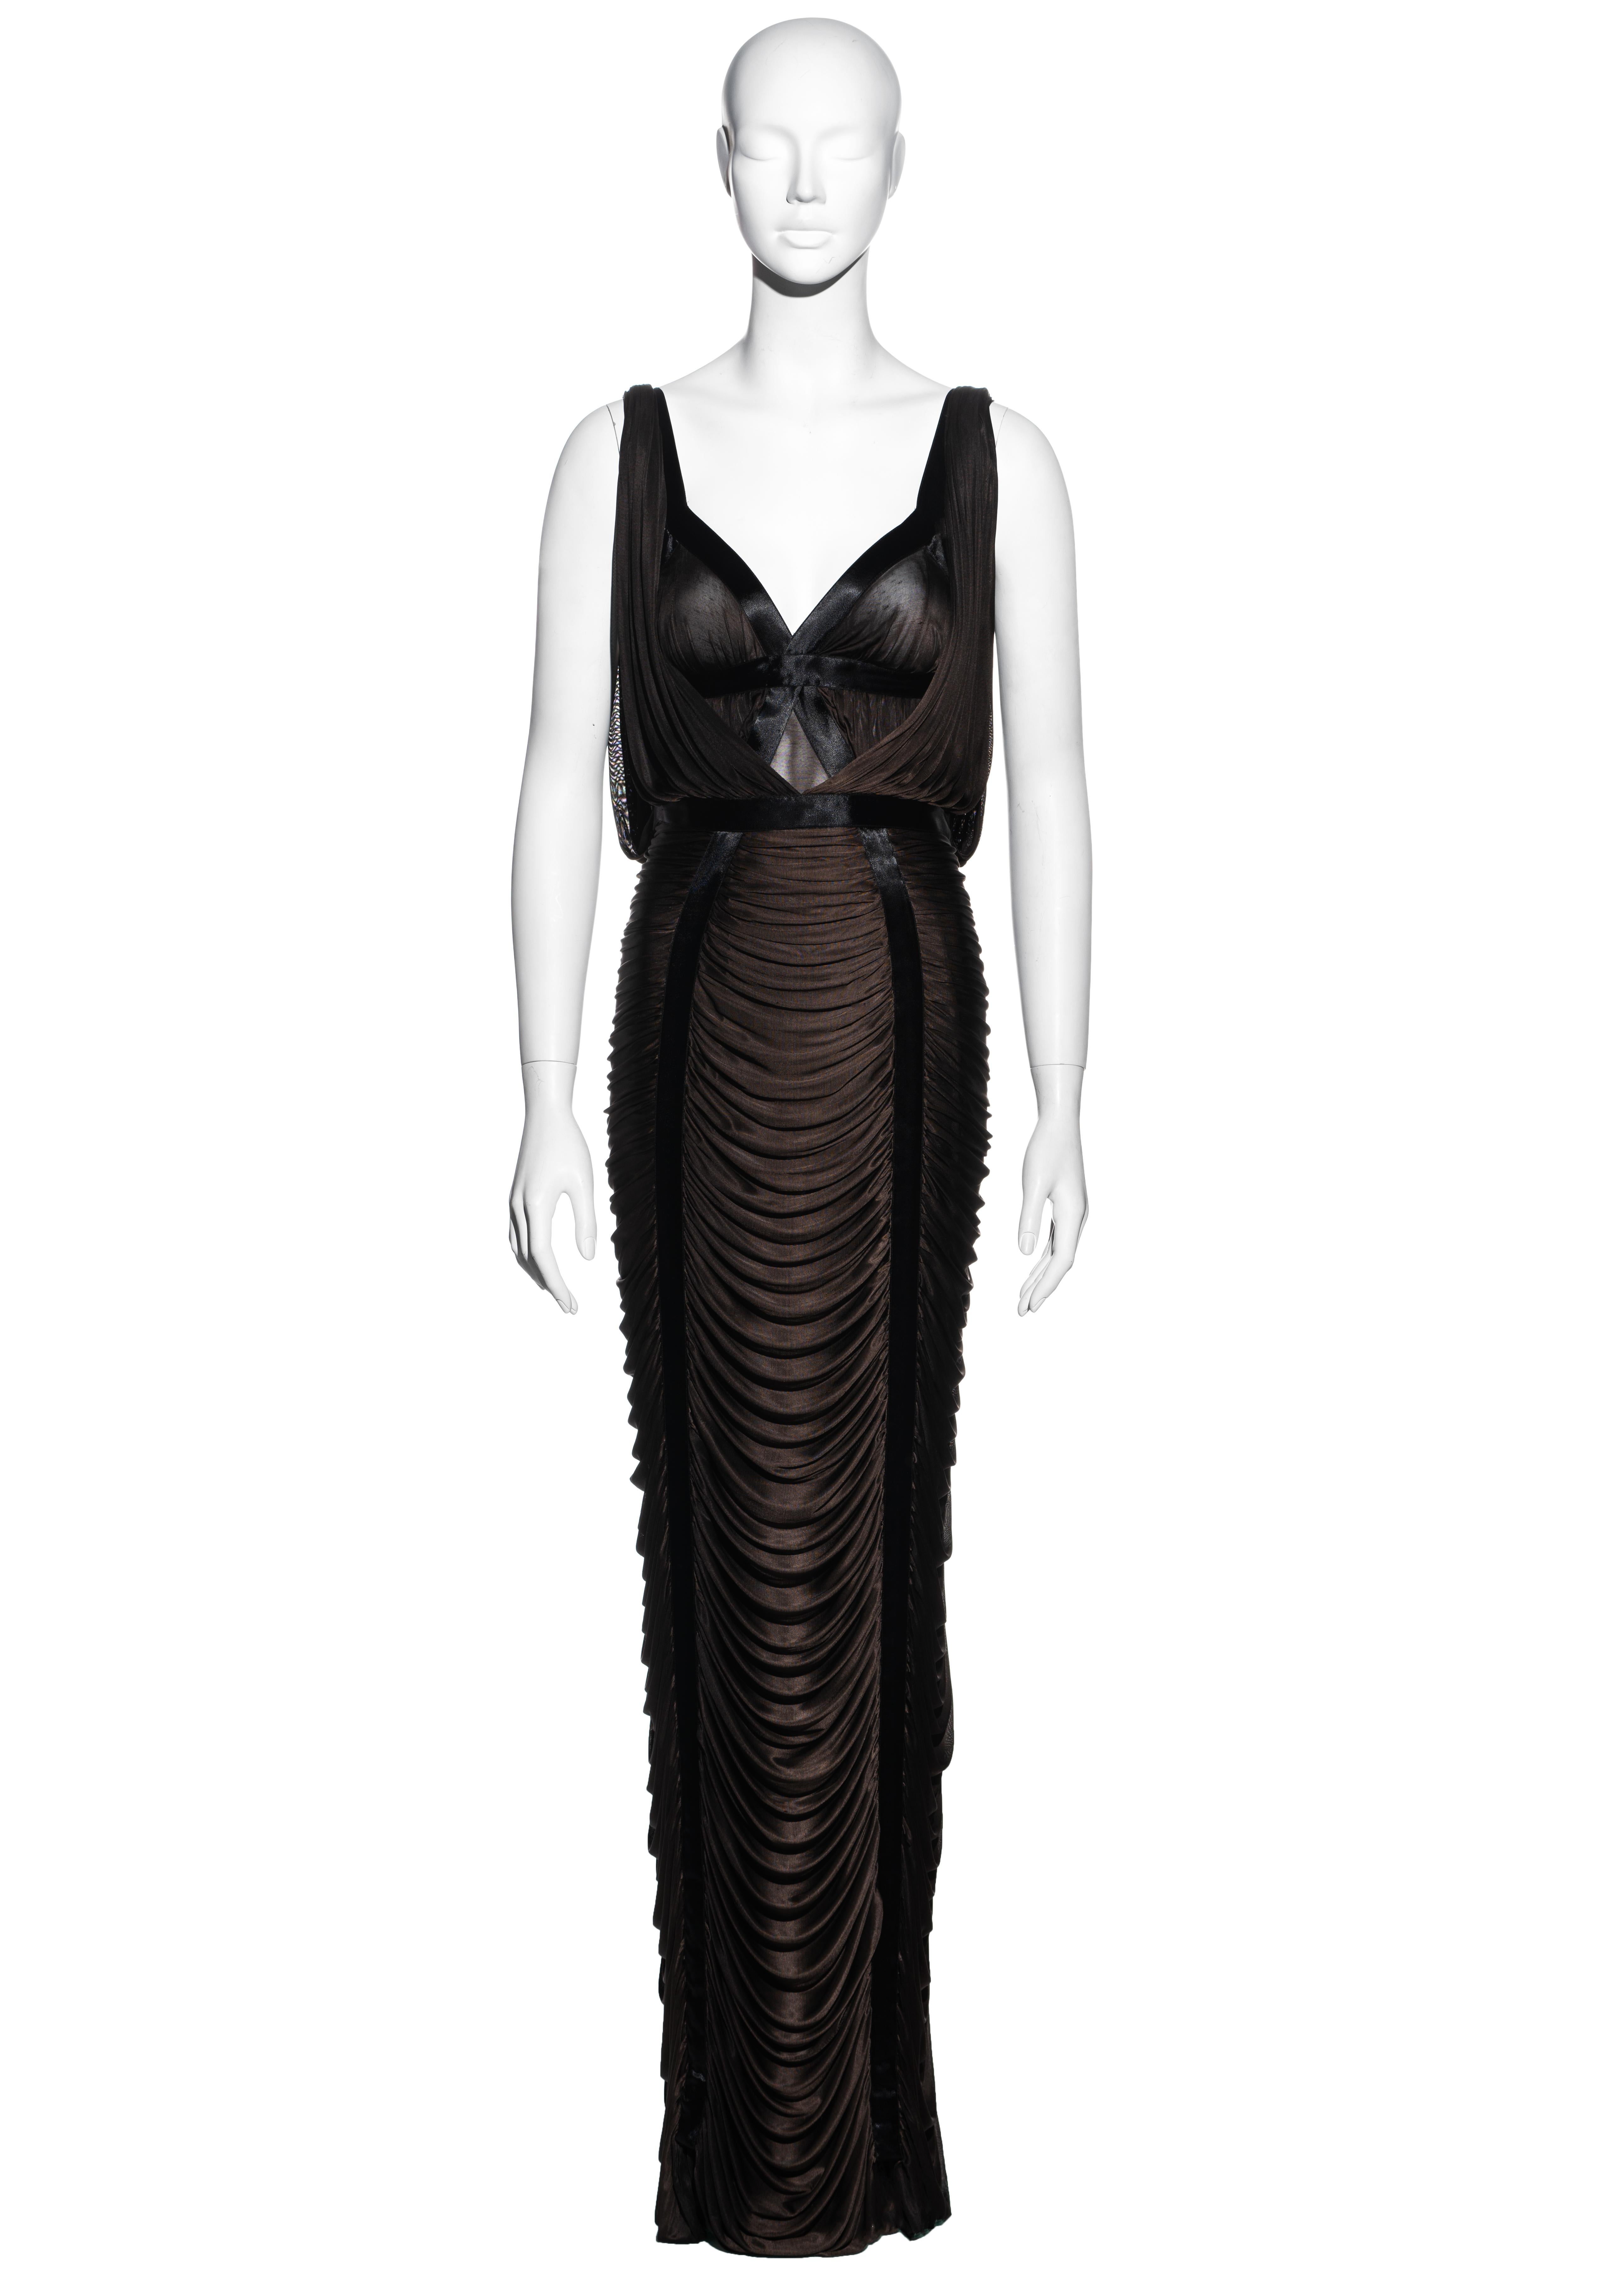 ▪ Yves Saint Laurent brown draped evening maxi dress
▪ Designed by Tom Ford
▪ Black silk ribbon 
▪ Draped detail on skirt 
▪ Size Small
▪ Spring-Summer 2003